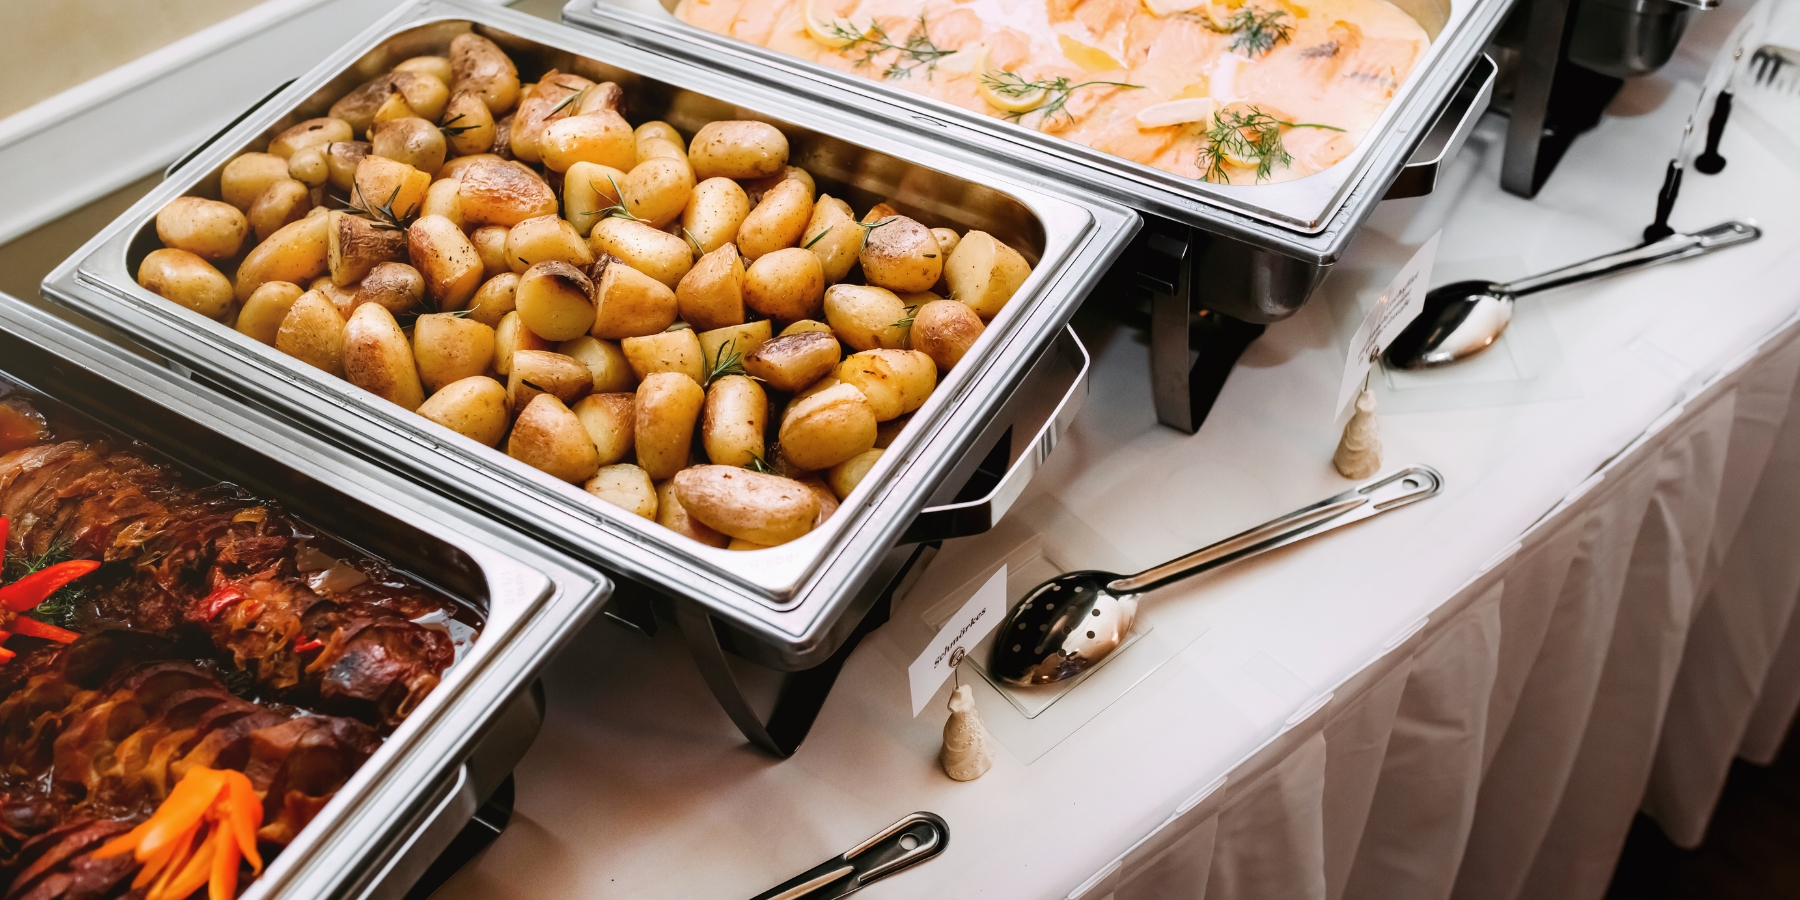 About Caterie - Wedding Catering - Event Catering - Erie Catering Company